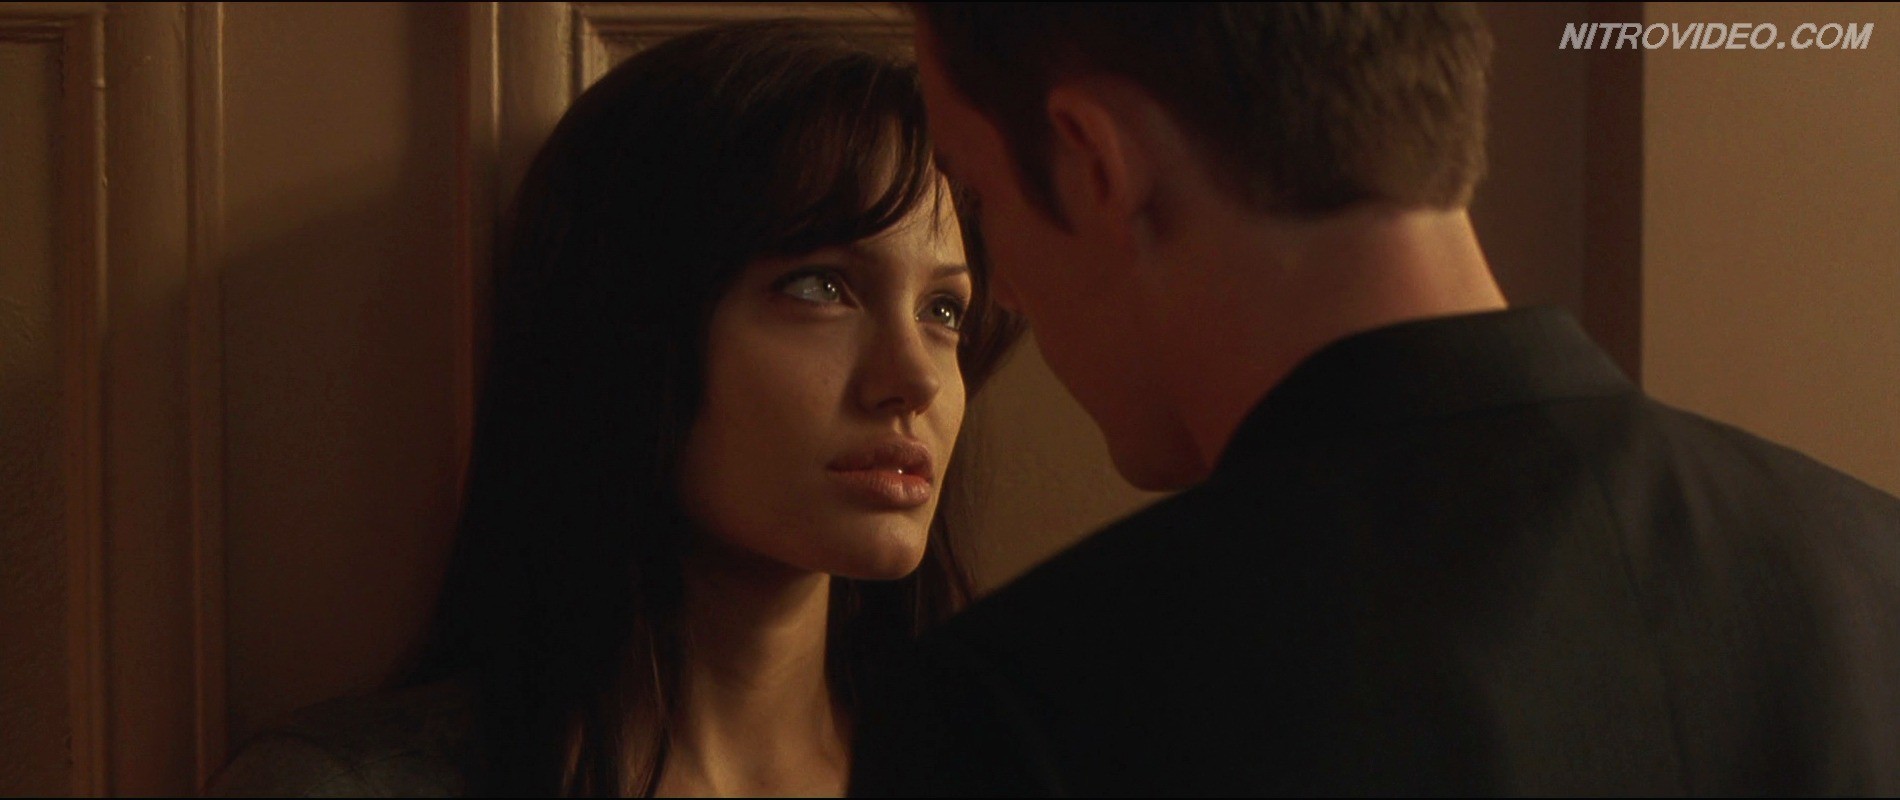 Sexual brunette Angelina Jolie fucked in Taking Lives #71584784